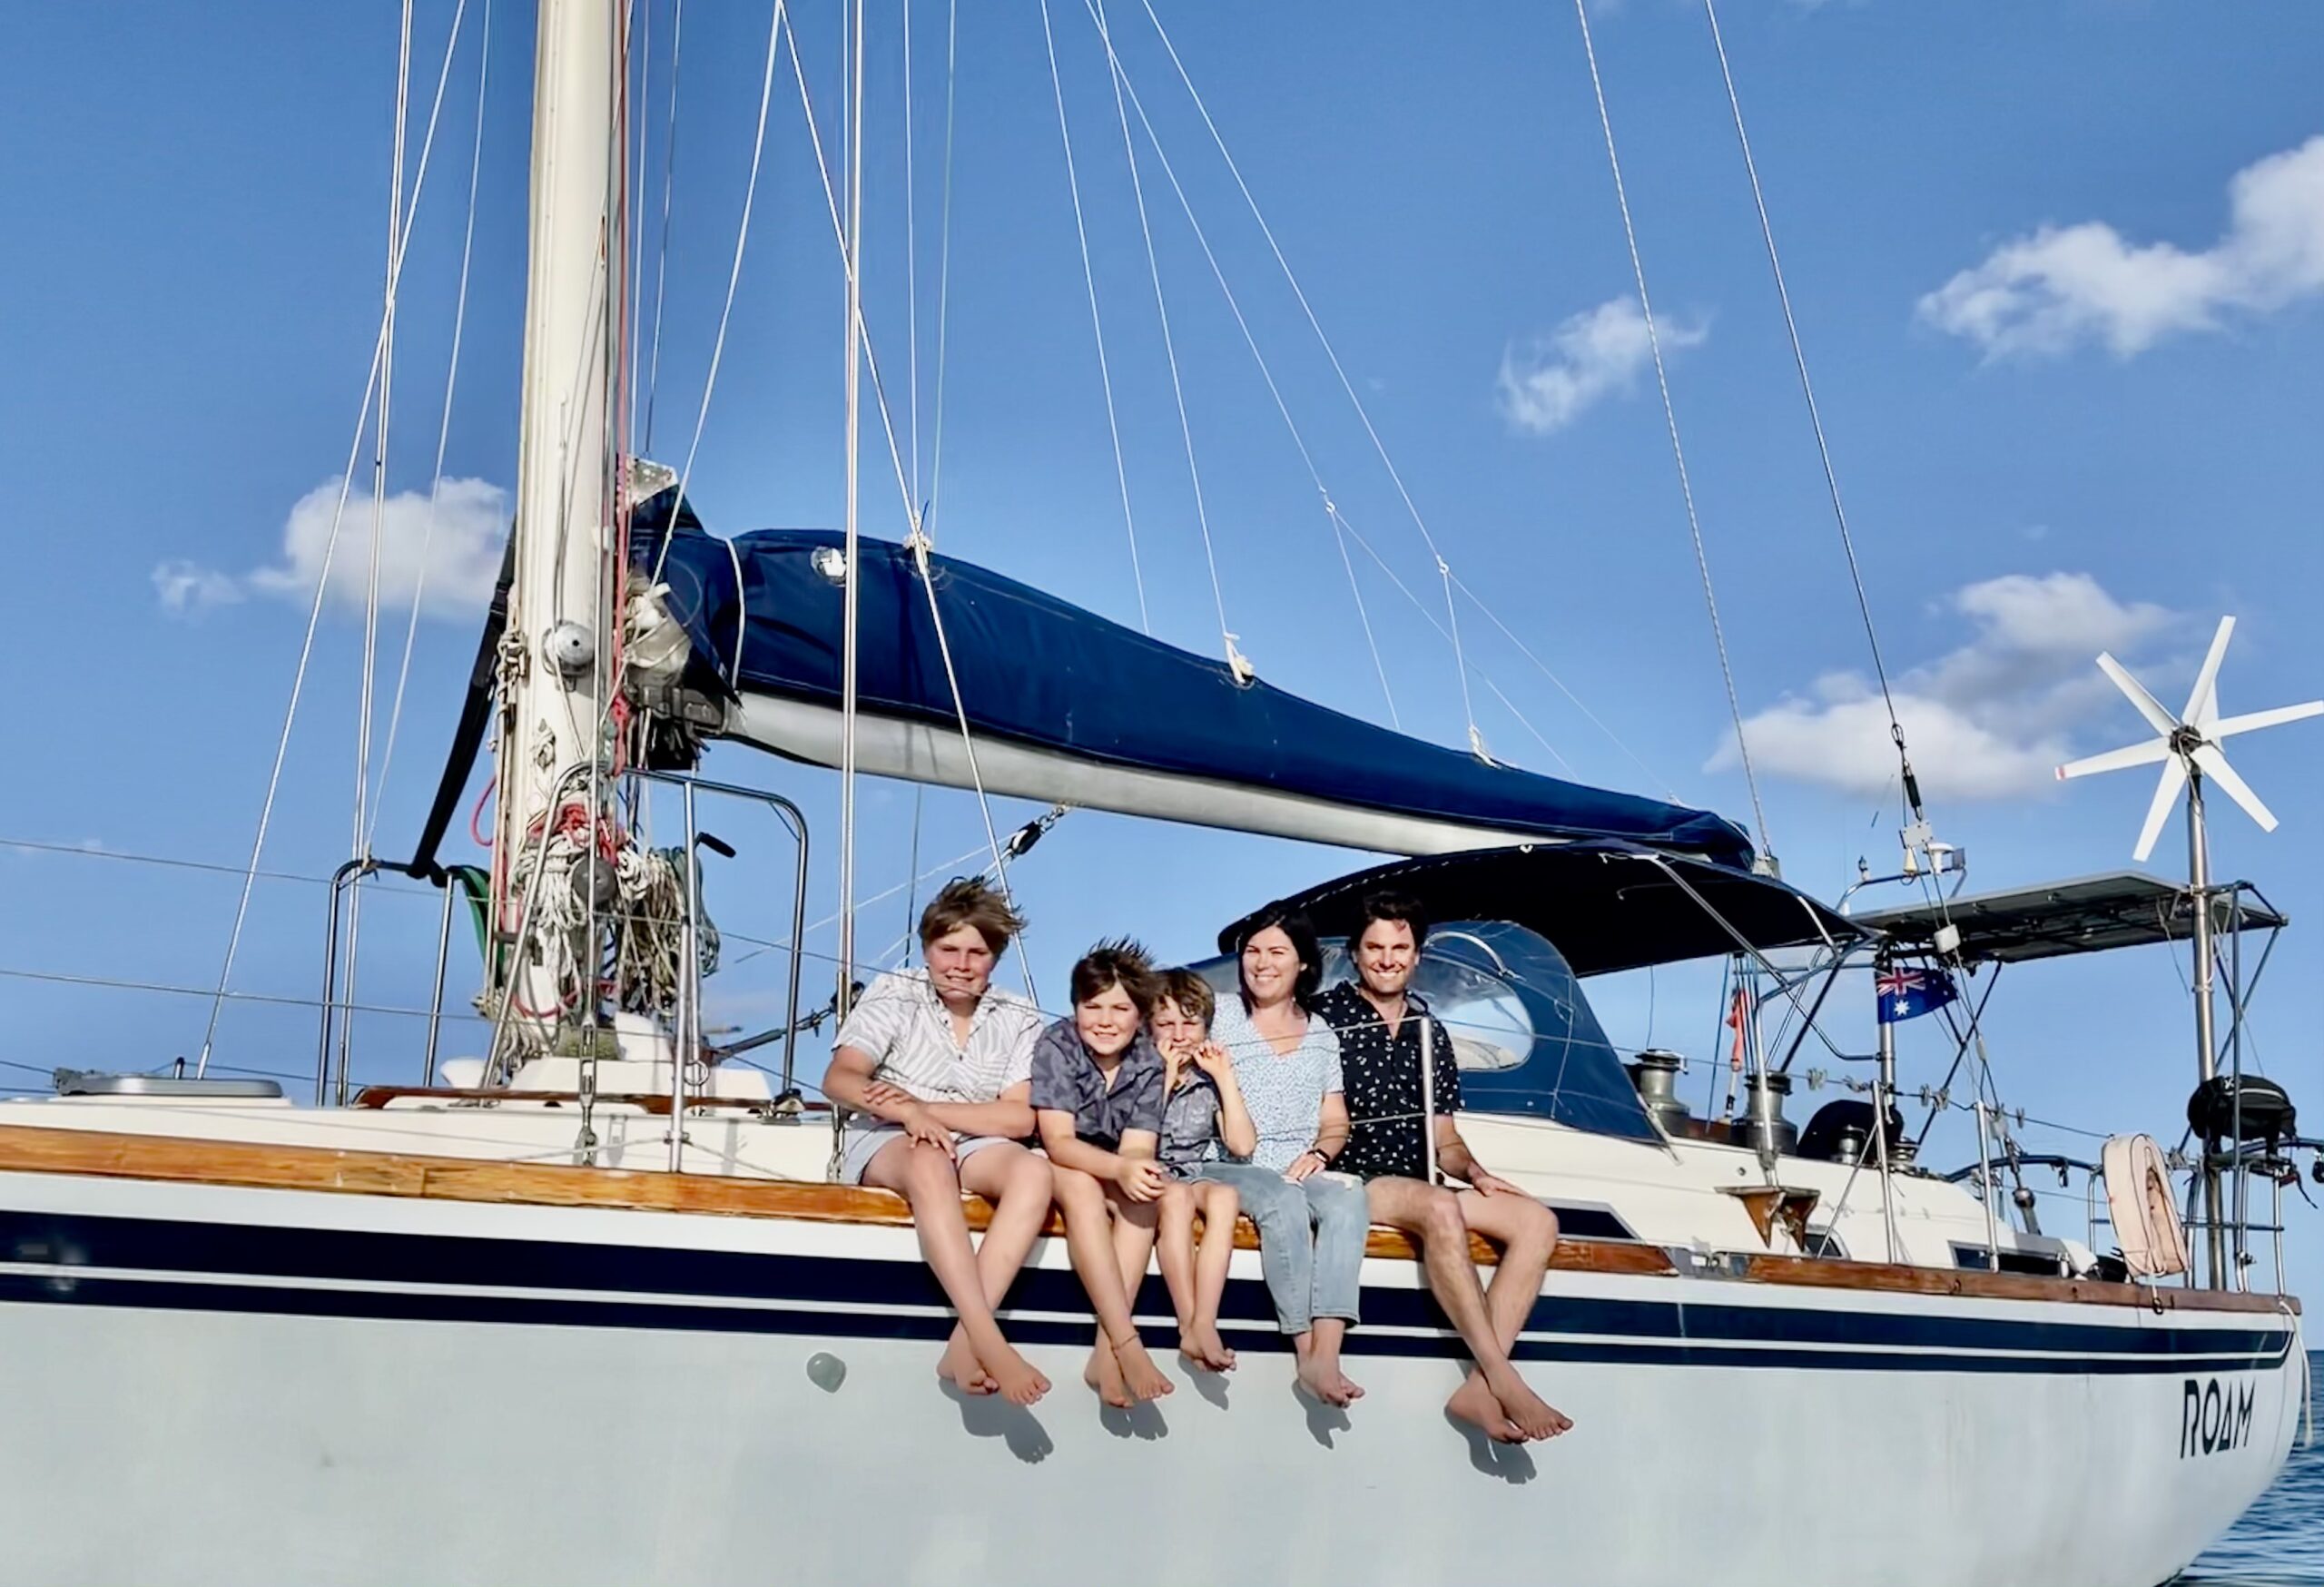 Erin and Her Family Gave Up Their Home to Live on a Yacht, Sailing Around the World